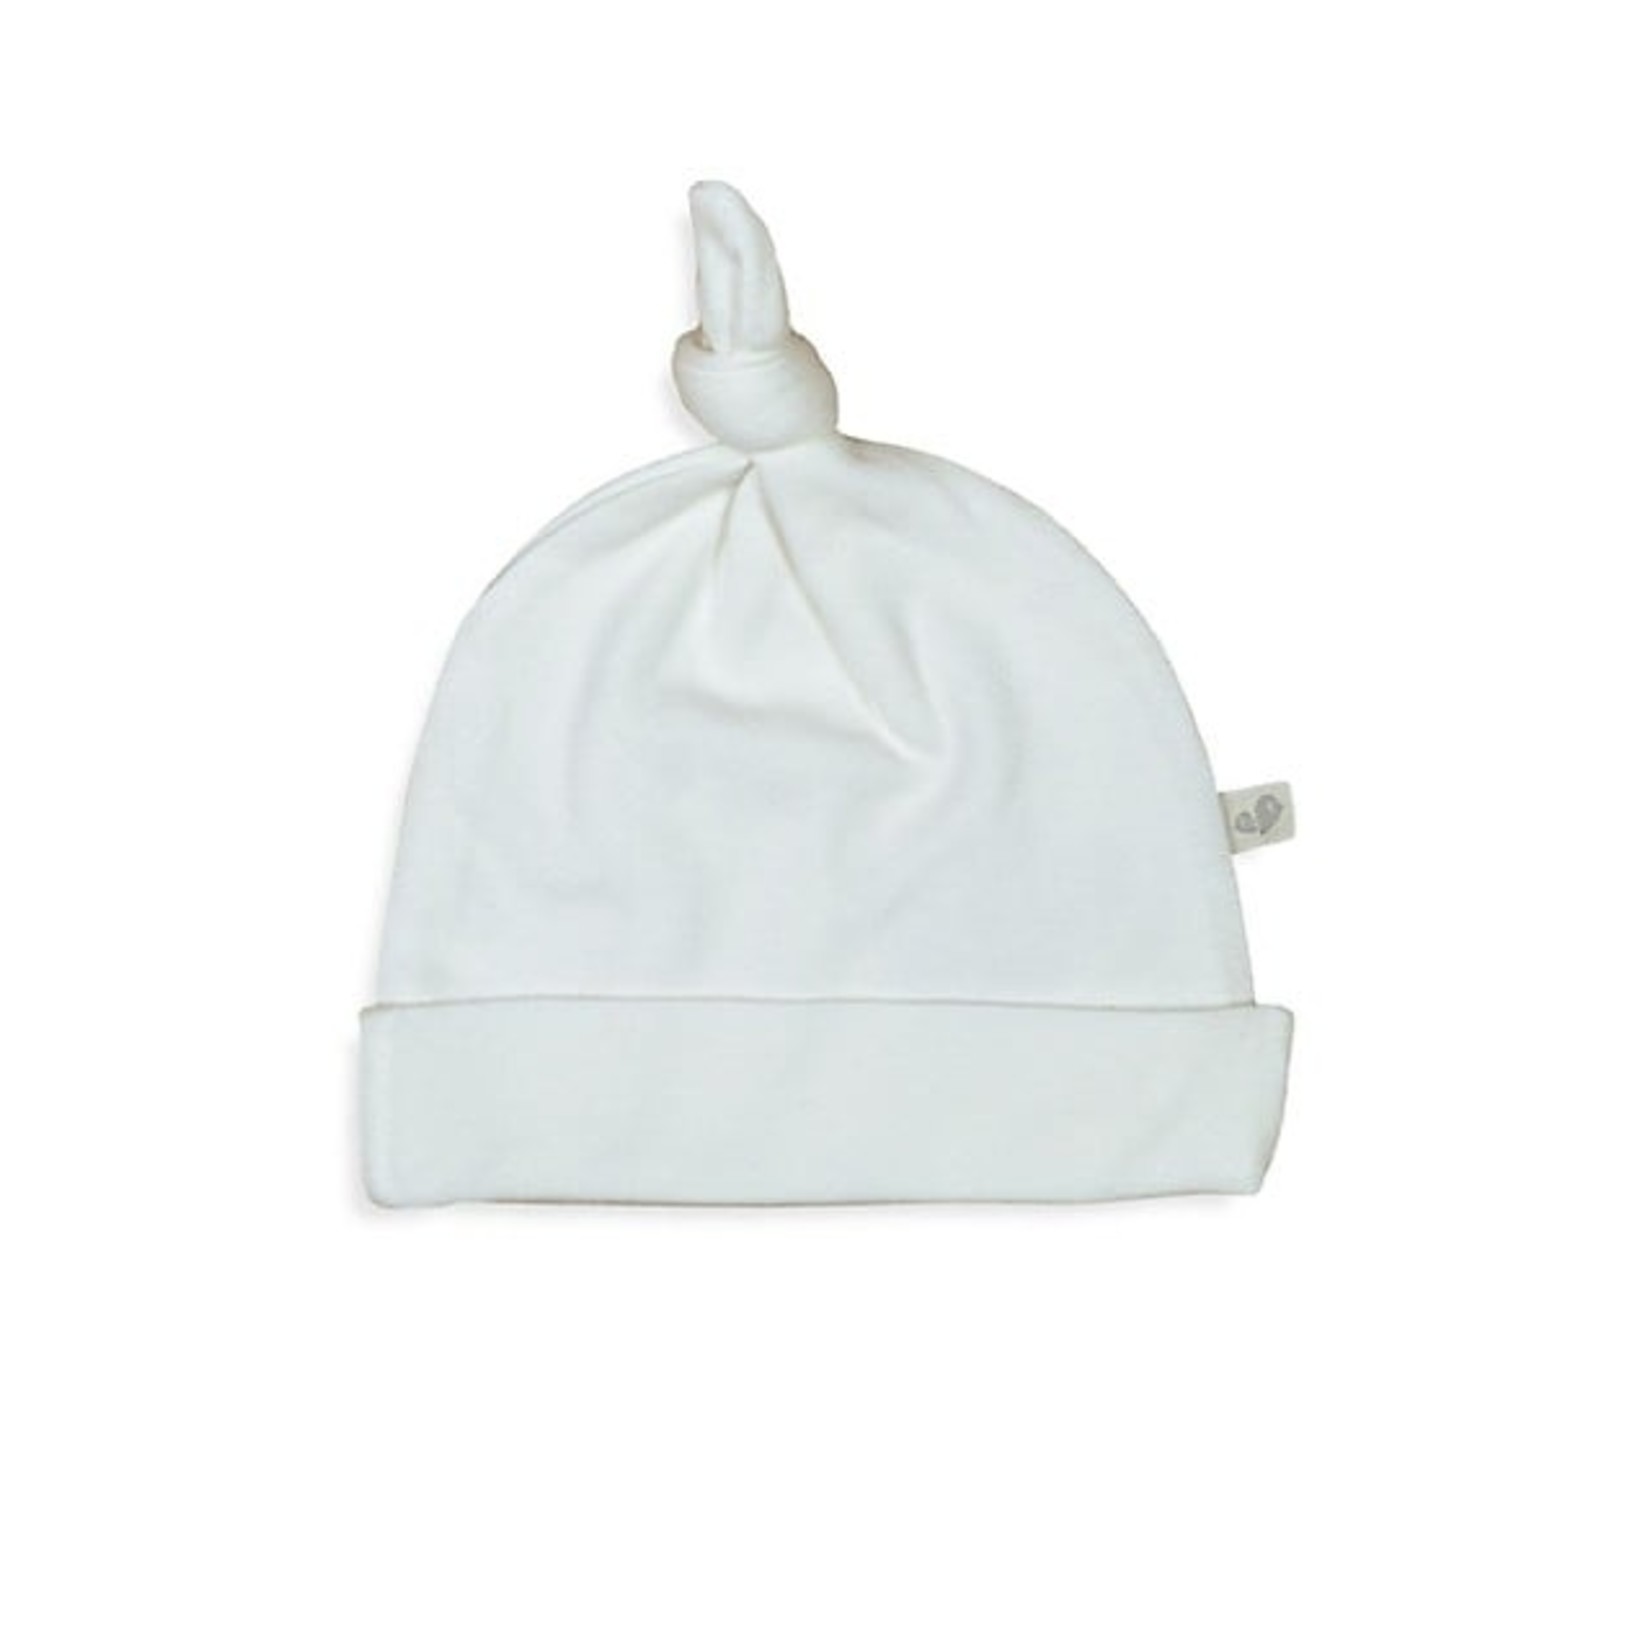 PERLIMPINPIN PERLIMPINPIN BAMBOO KNOTTED HAT 0-3 MONTHS